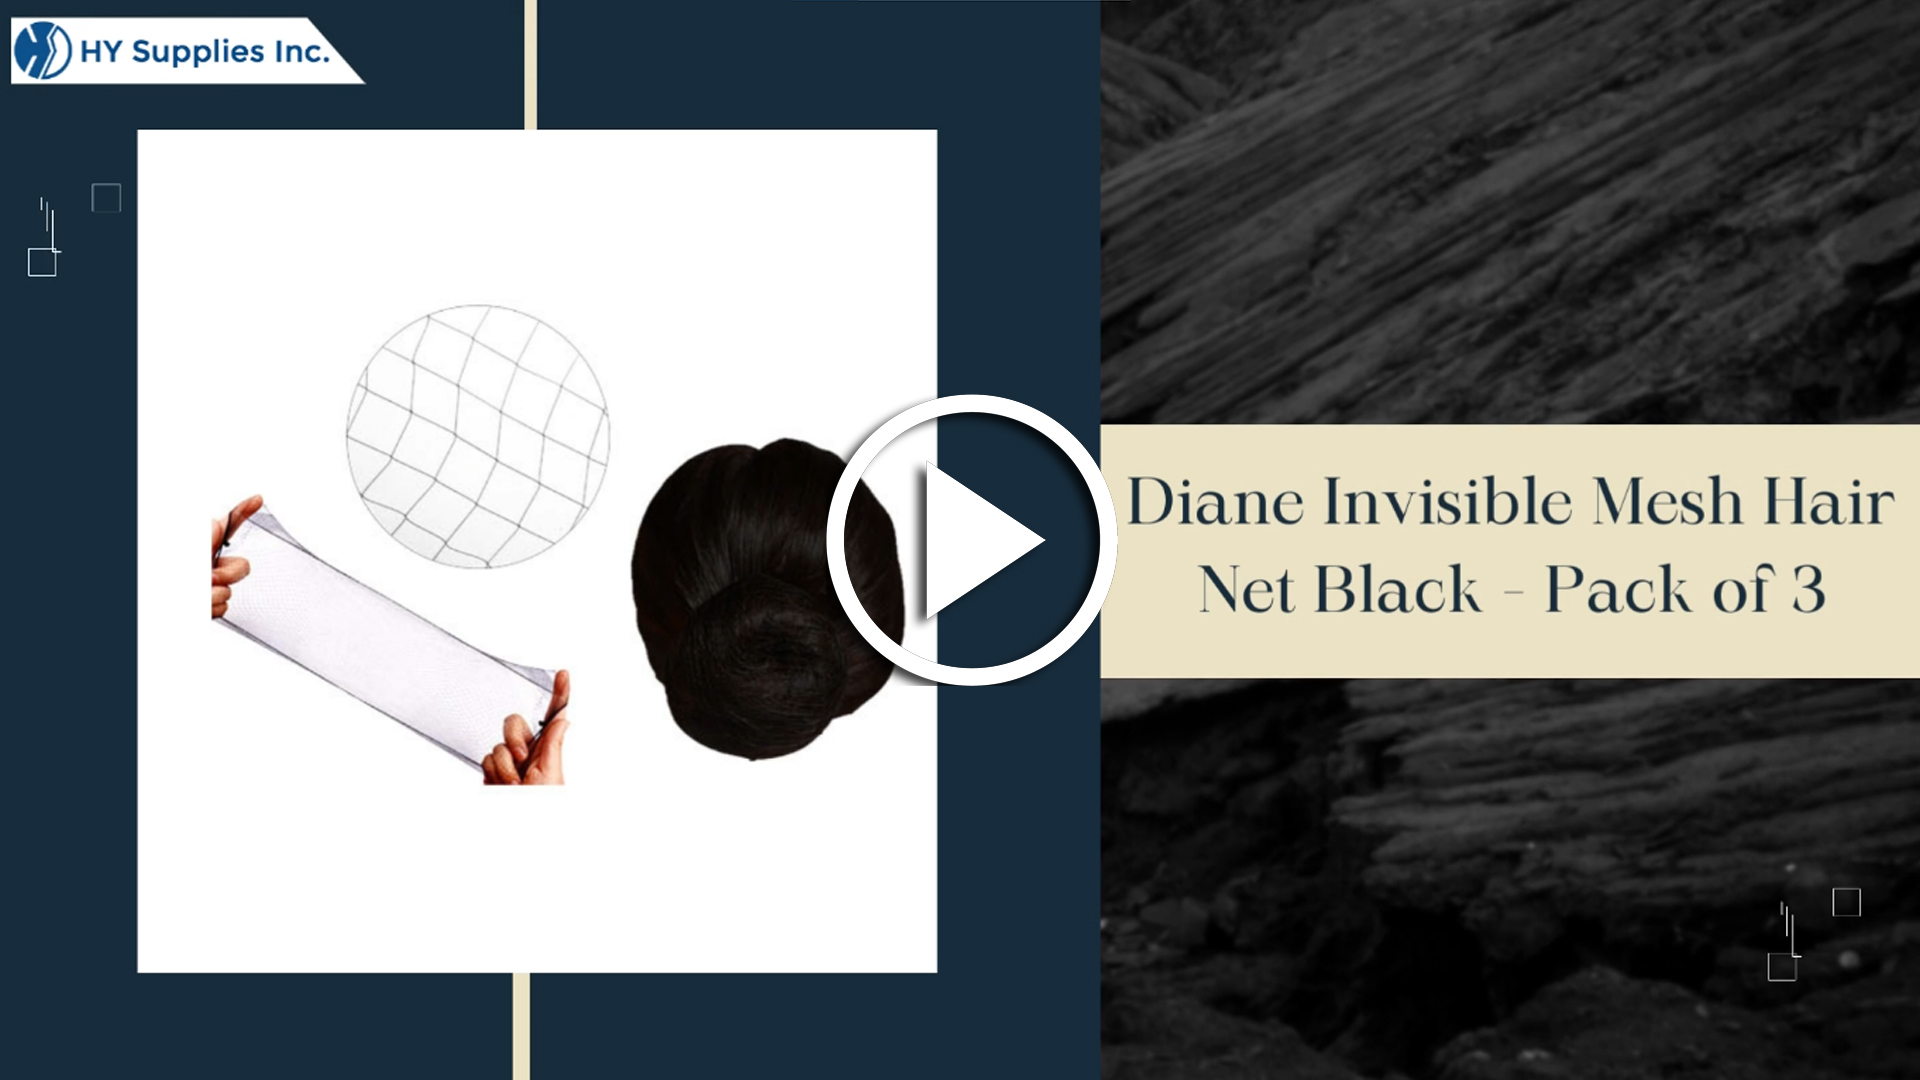 Diane Invisible Mesh Hair Net Black - Pack of 3